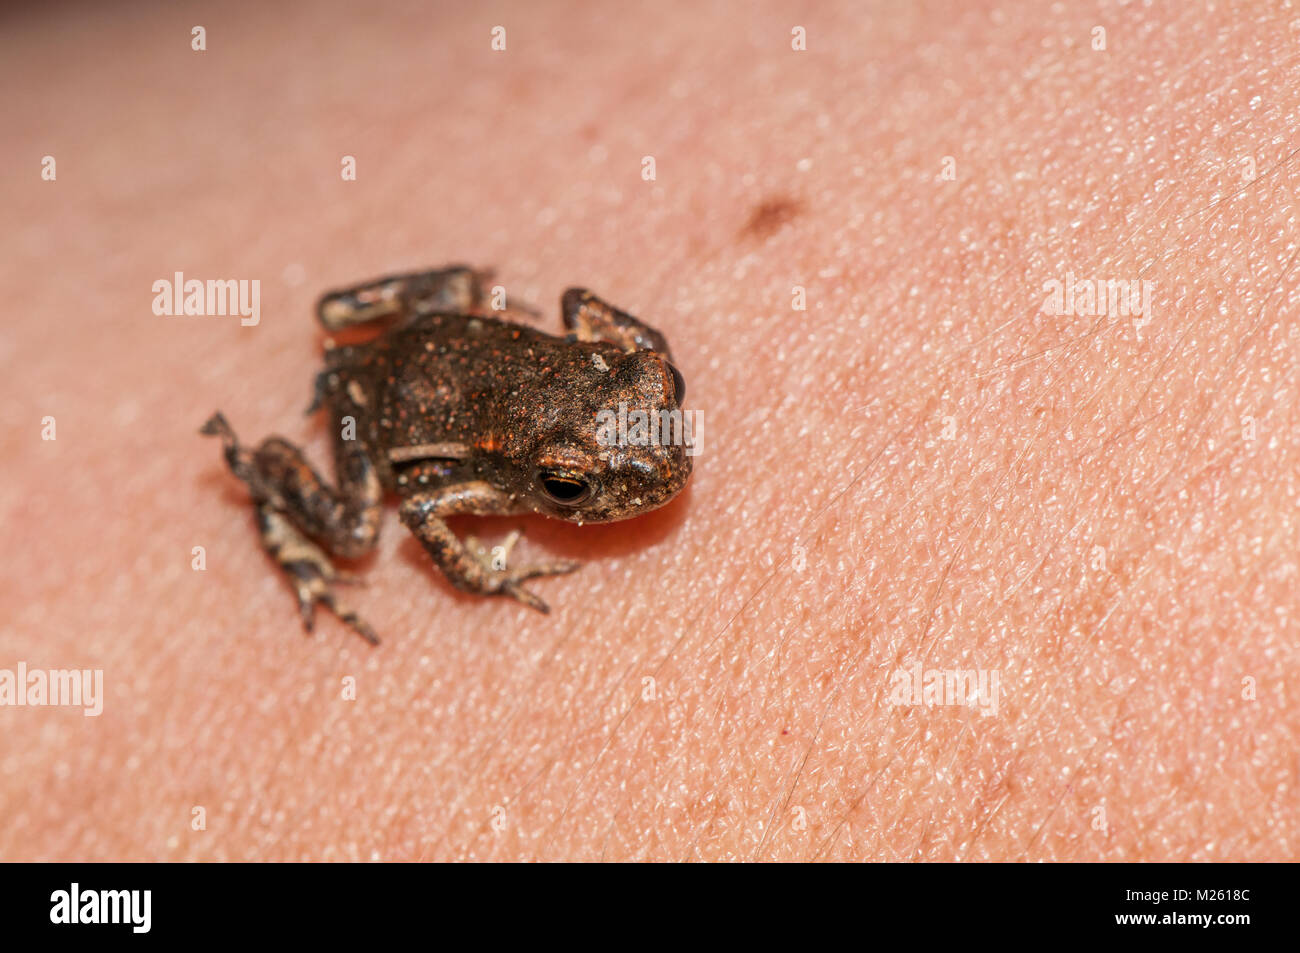 common midwife toad (Alytes obstetricans obstetricans) over the back of the hand, Banyoles, Catalonia, Spain Stock Photo